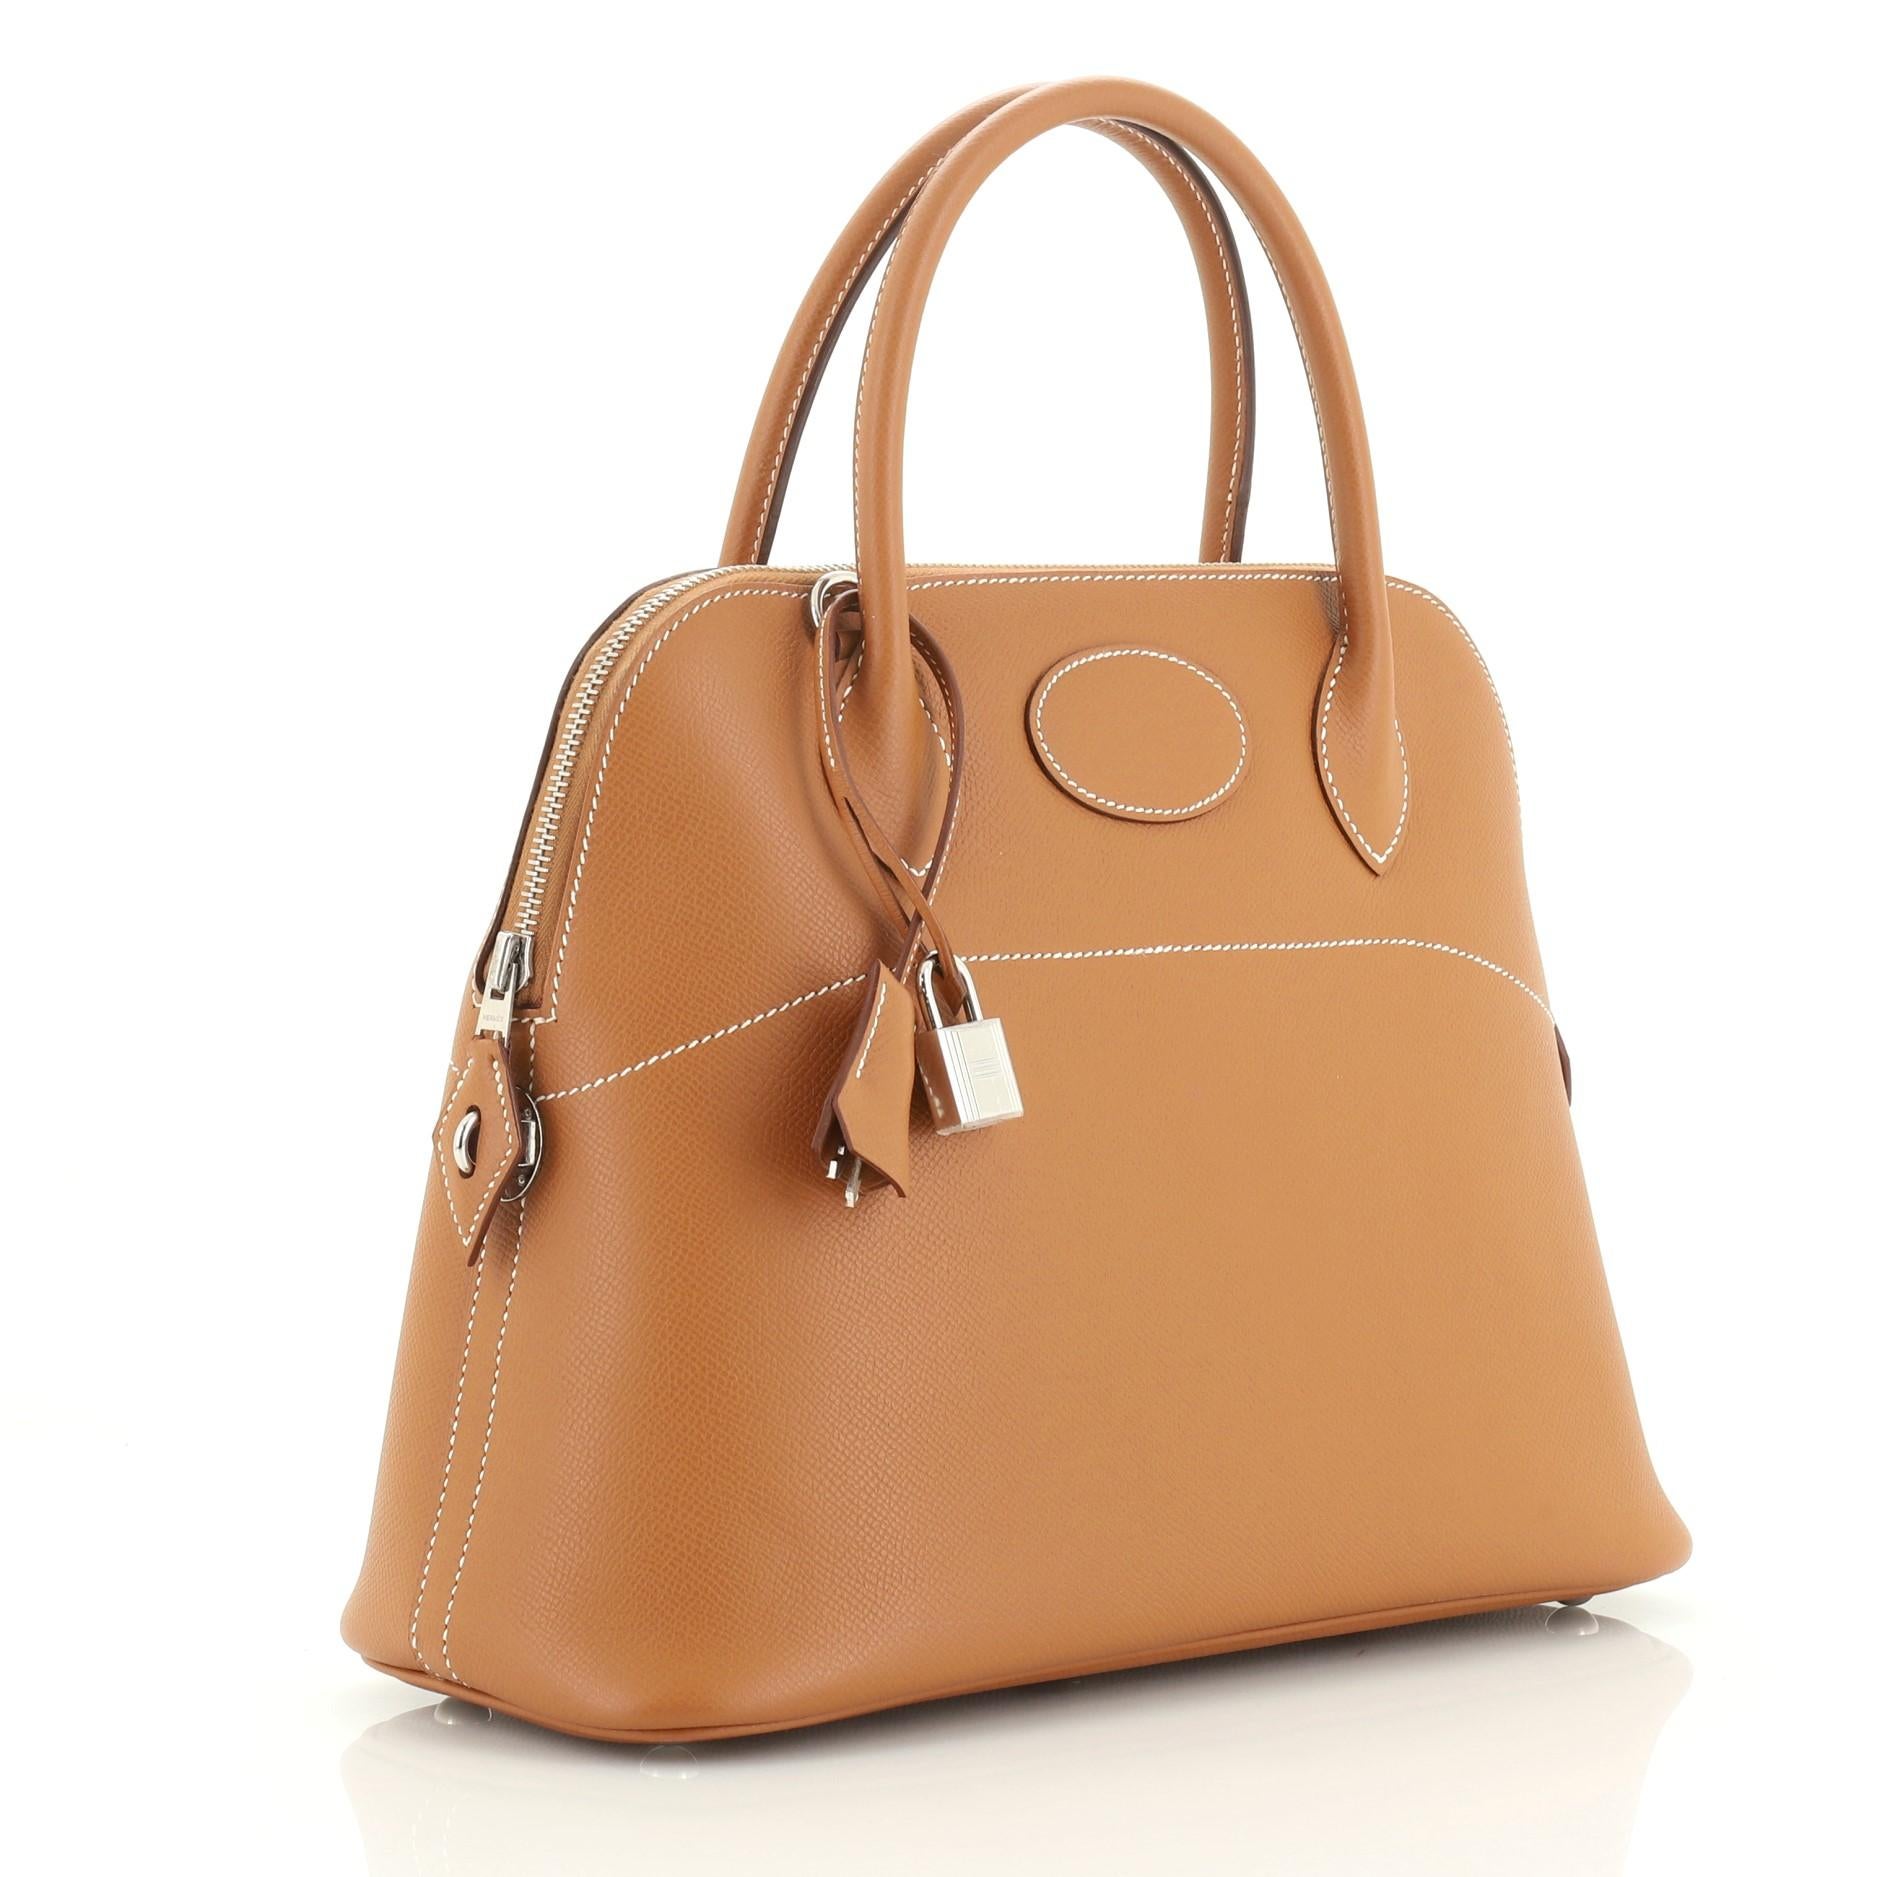 This Hermes Bolide Handbag Epsom 31, crafted from Gold brown Epsom leather, features dual-rolled leather handles, protective base studs, side lock hardware and palladium hardware. Its zip closure opens to a Gold brown Agneau interior. Date stamp